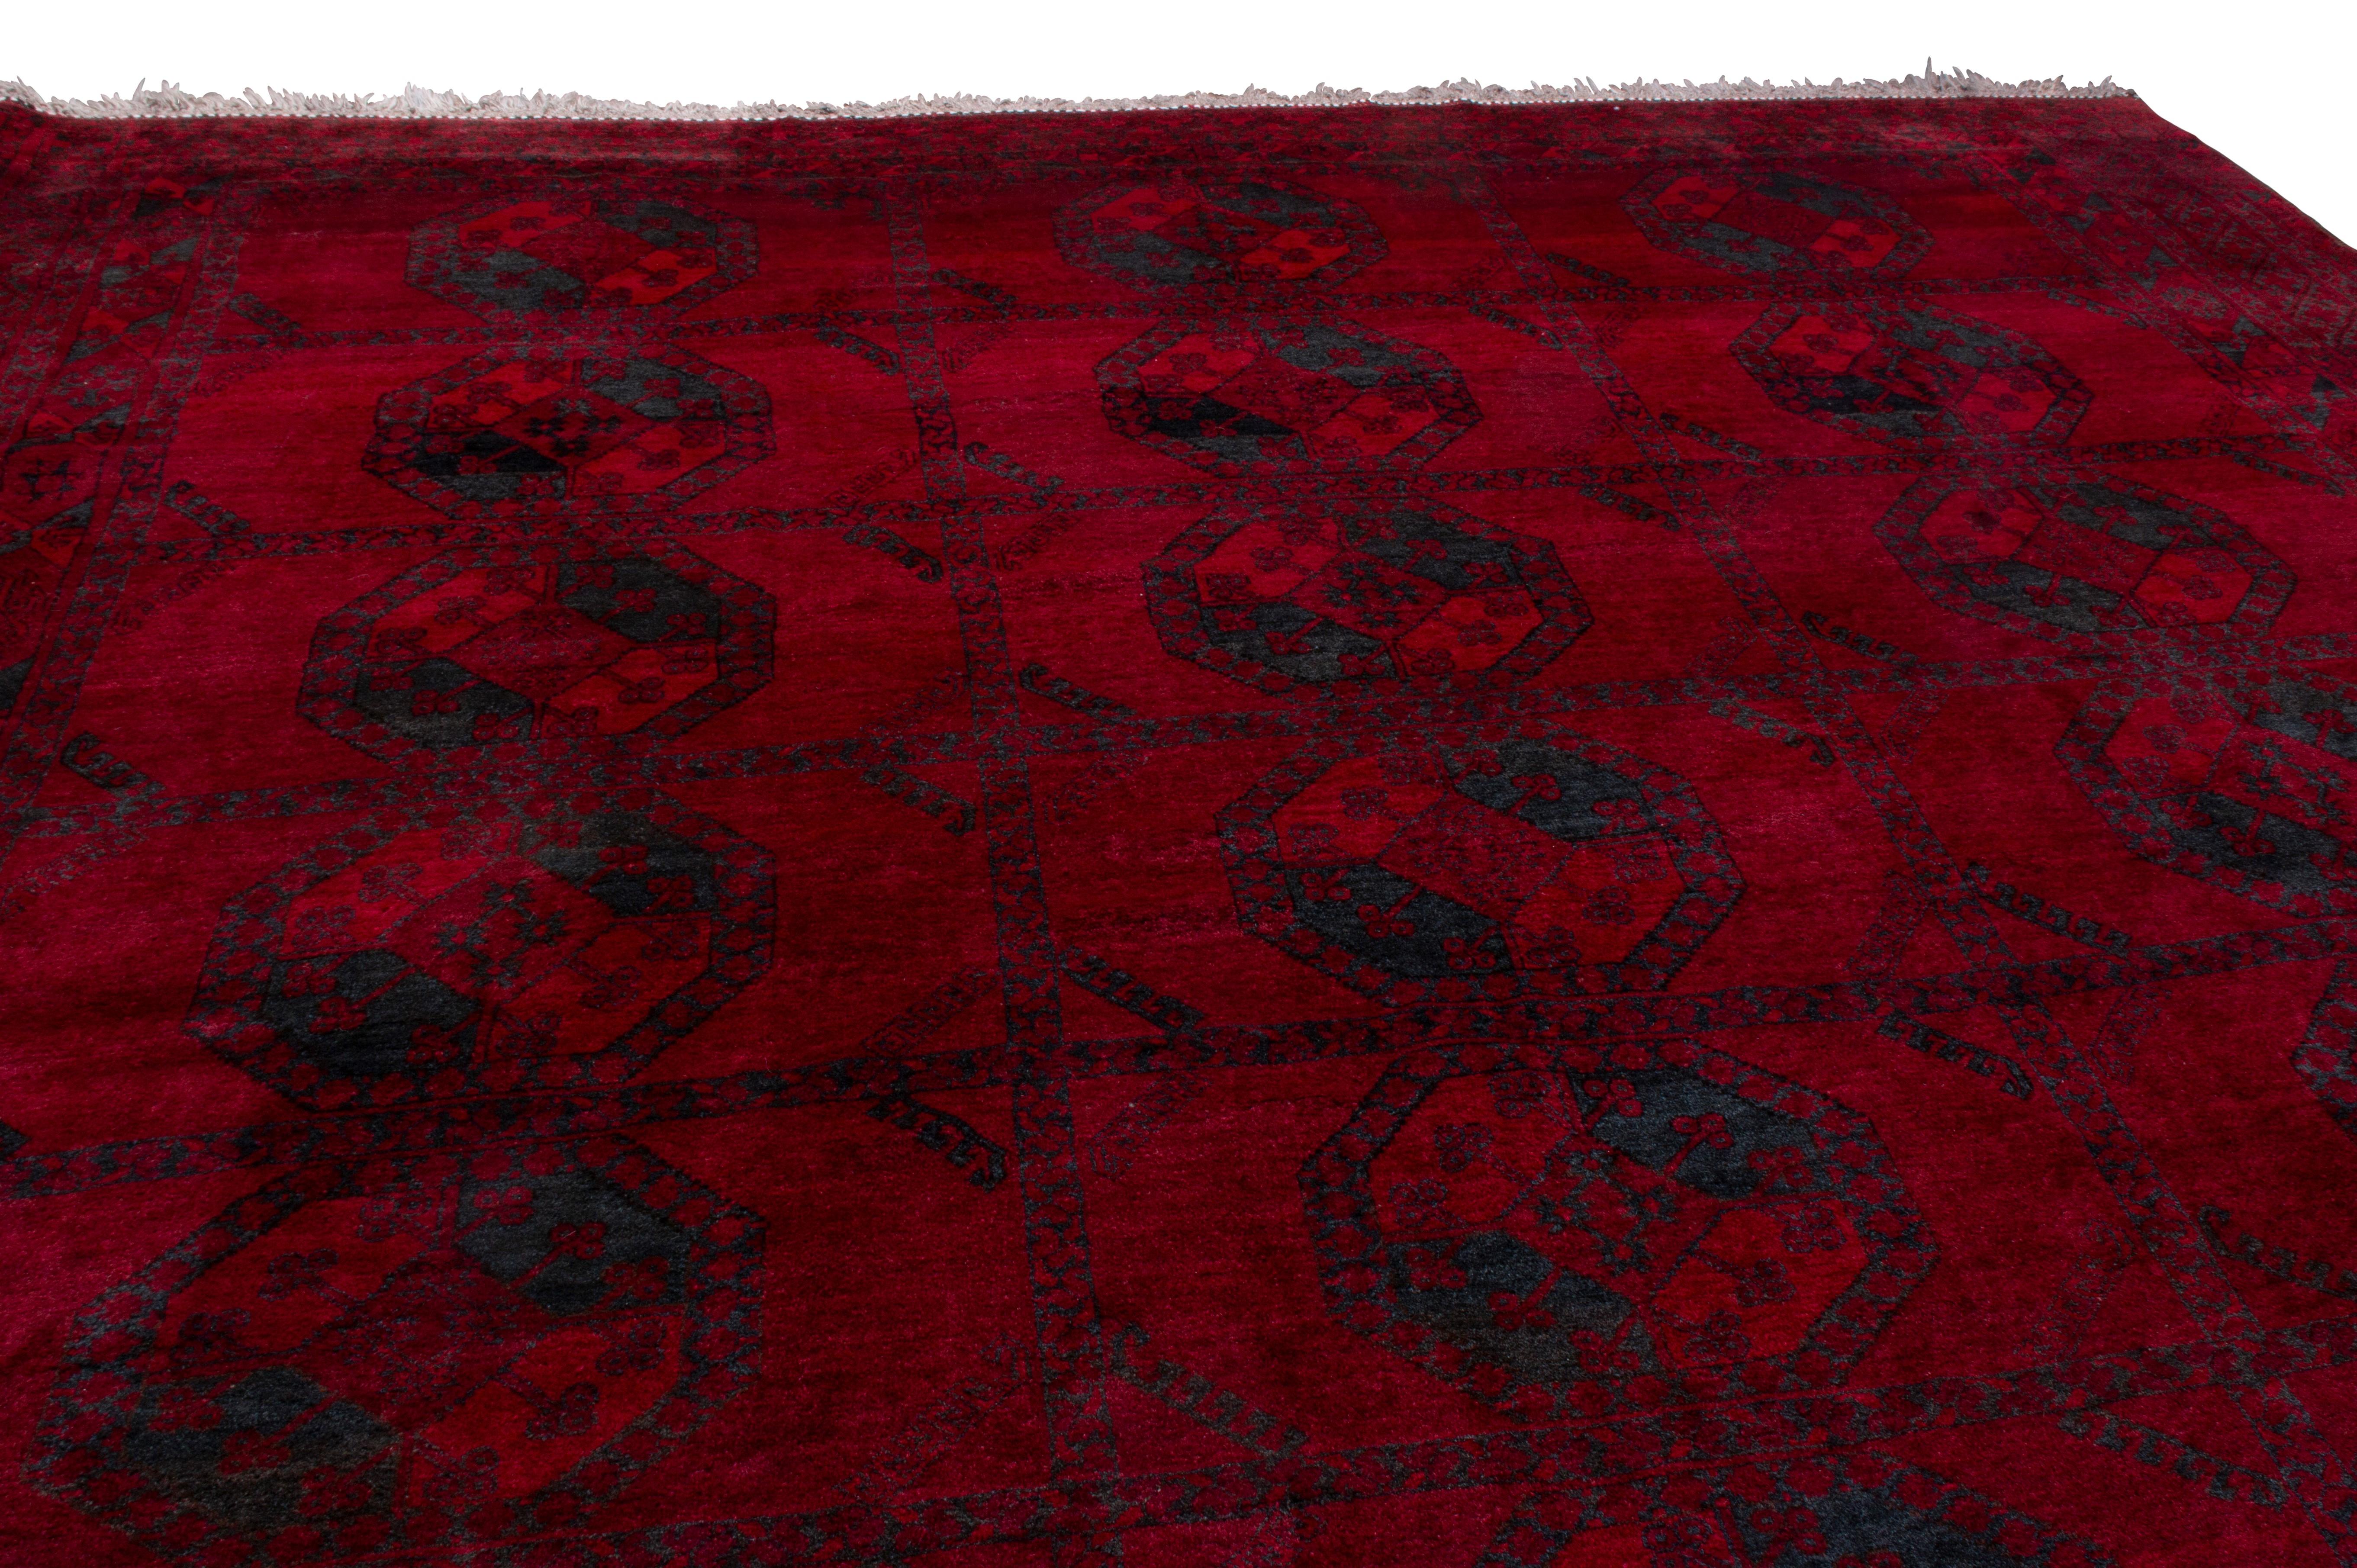 Originating from Afghanistan in 1950, hand knotted in durable, high-quality wool, this more modern Afghan piece enjoys a more finely woven pattern than even its renowned antique ancestors, though it still employs bold color contrast with the